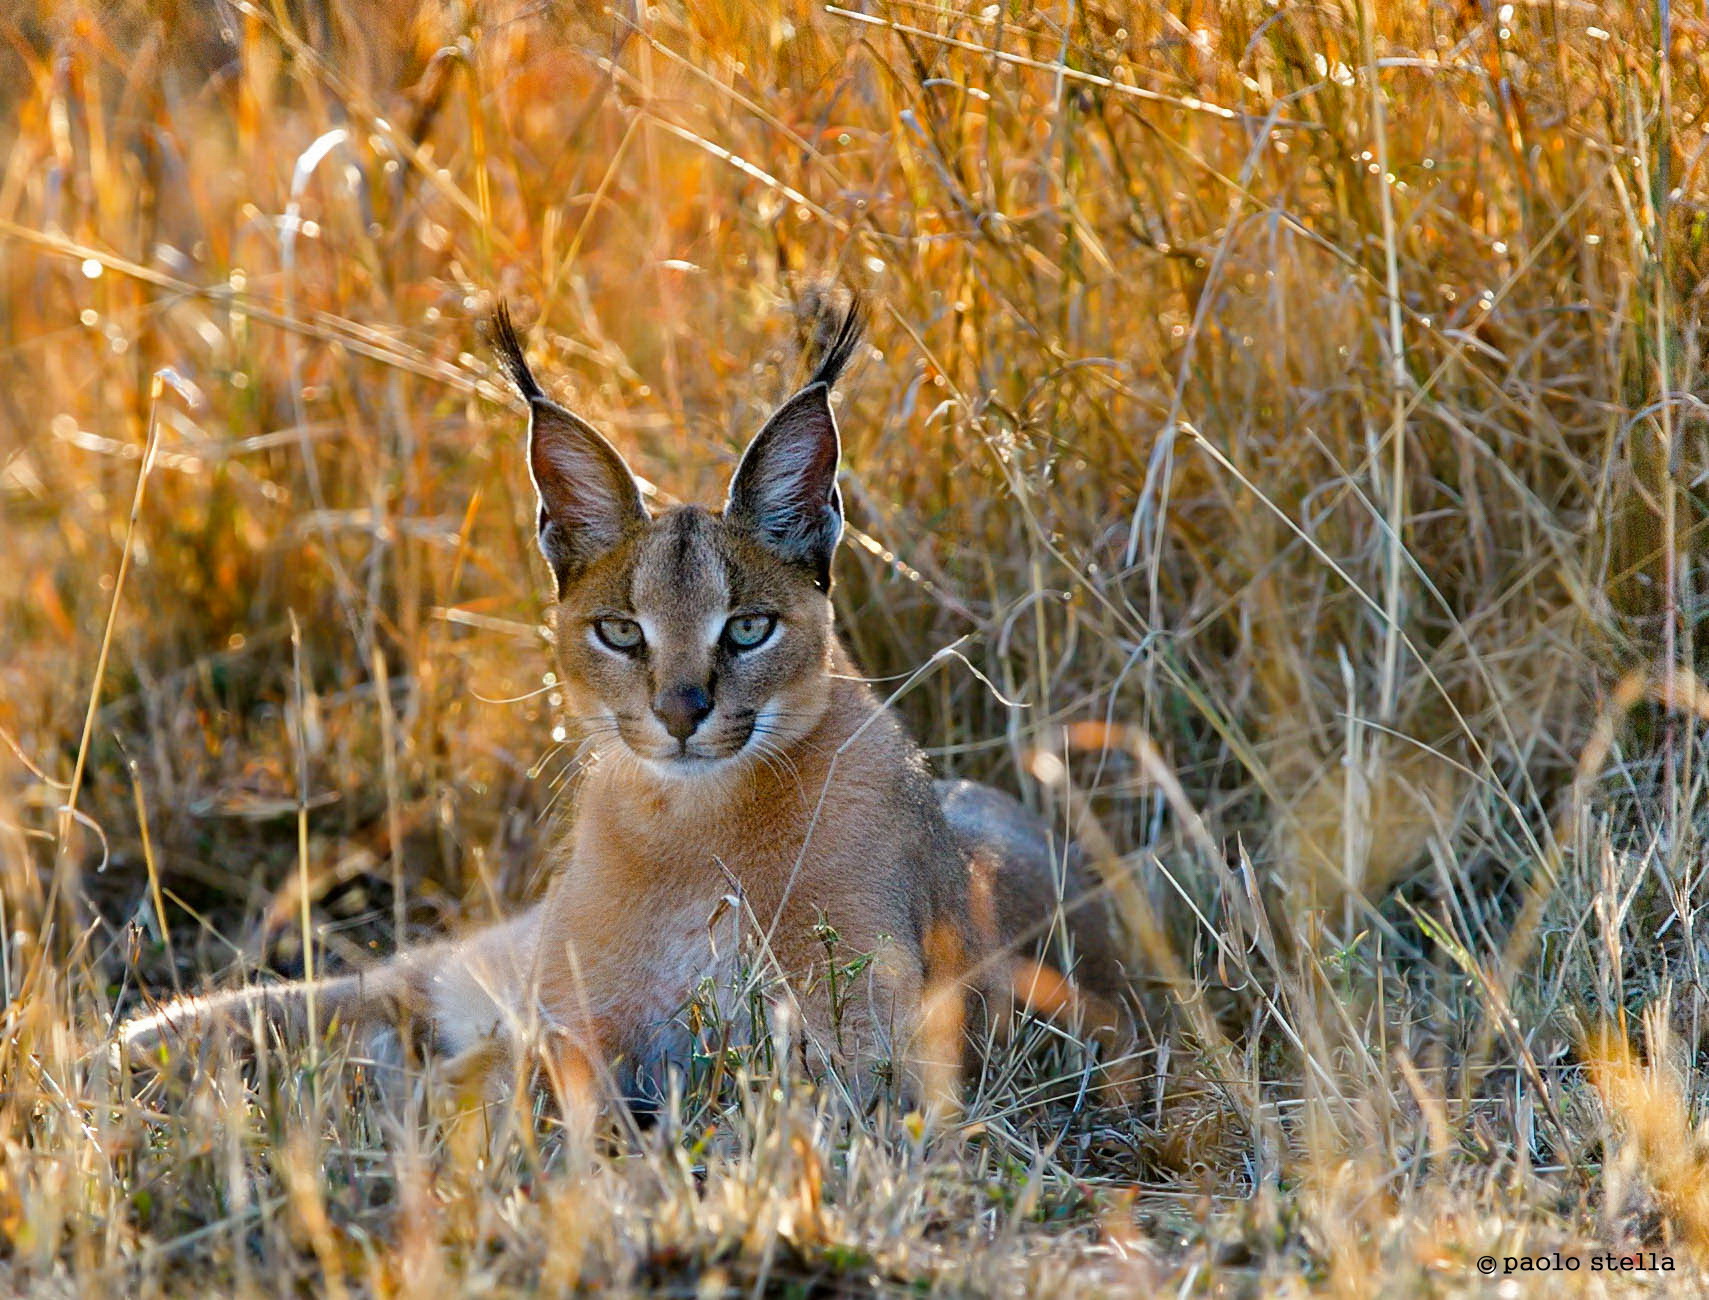 the look of the caracal...